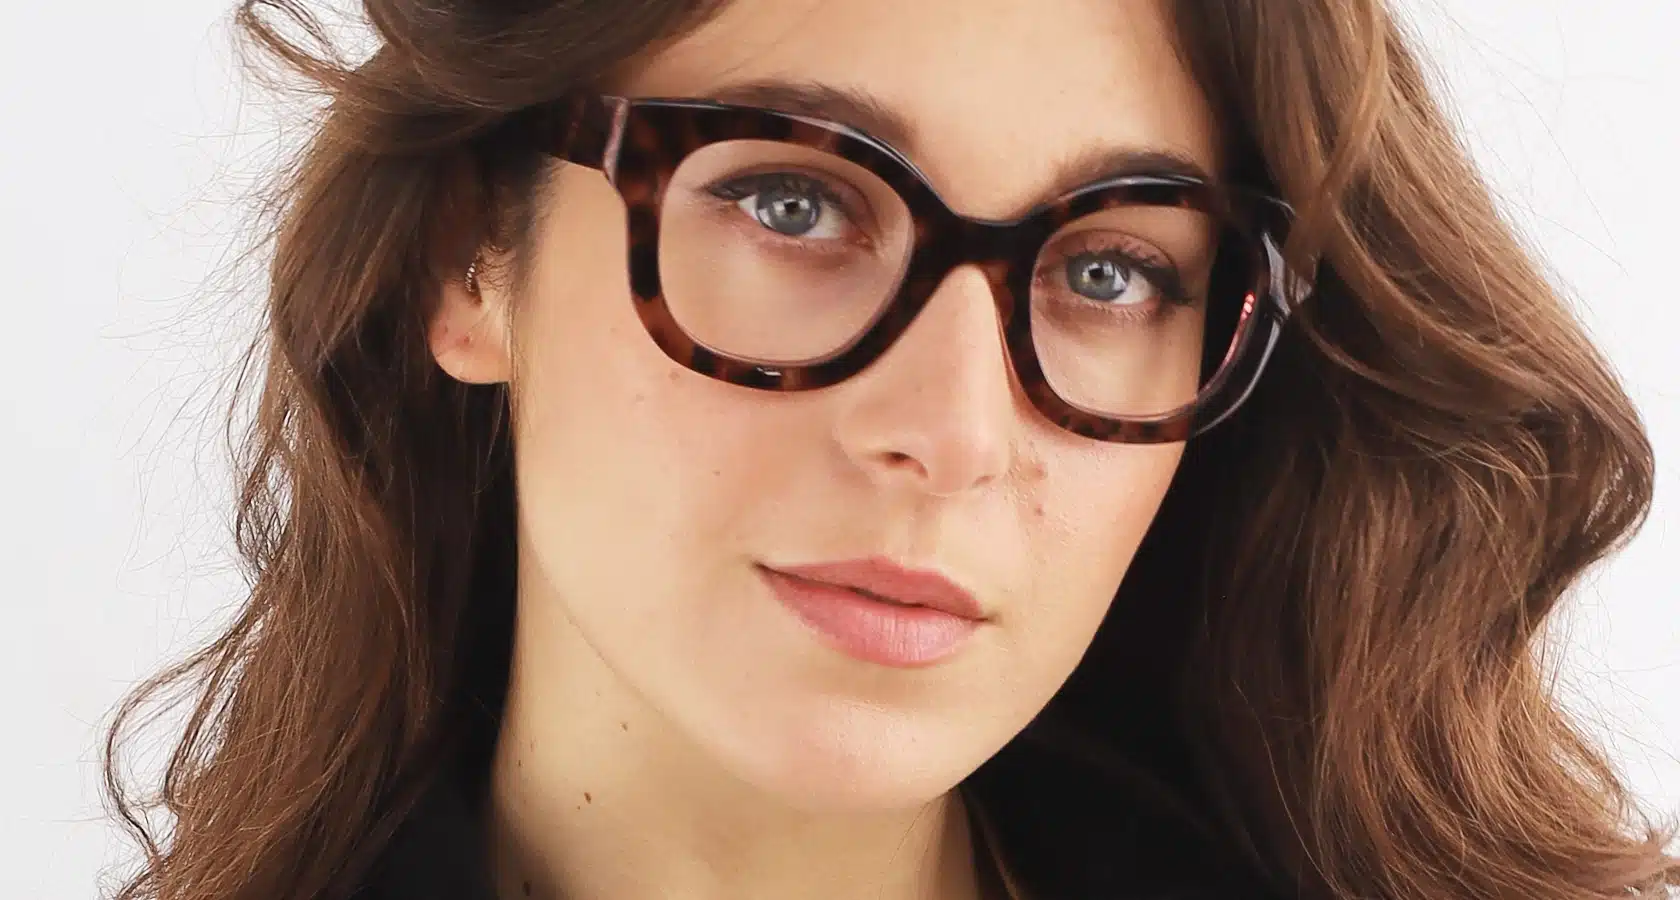 The Chic Eyewear Collaboration between LaFont & Pierre Frey